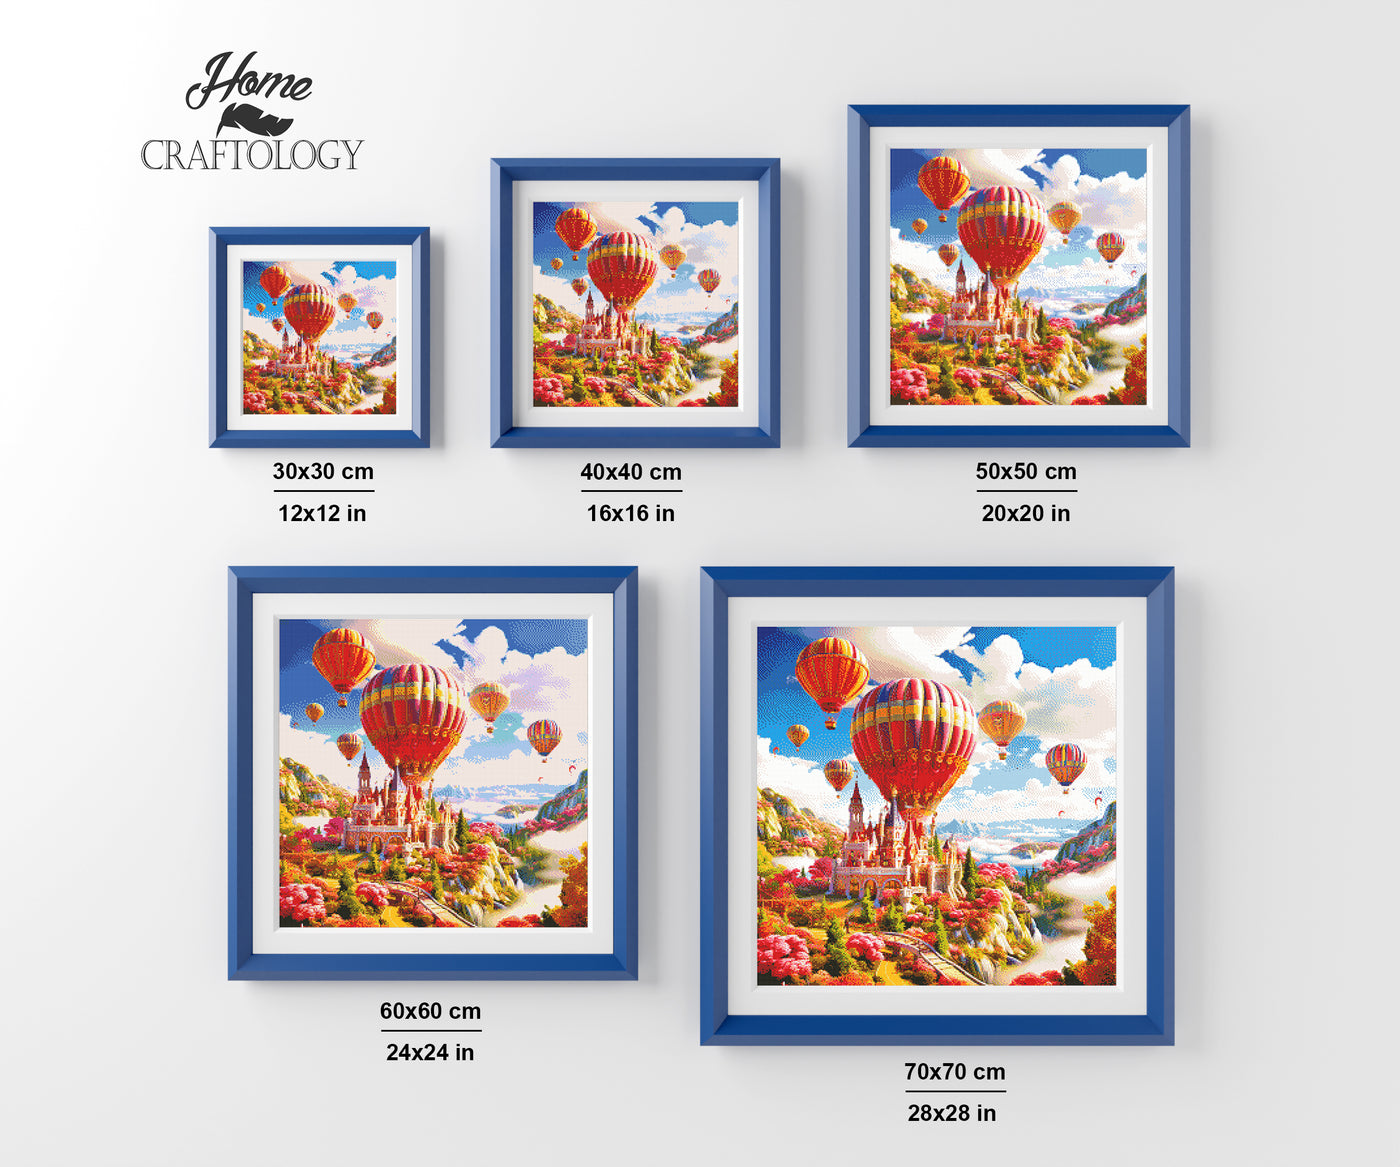 New! Castle with Hot Air Balloon - Premium Diamond Painting Kit